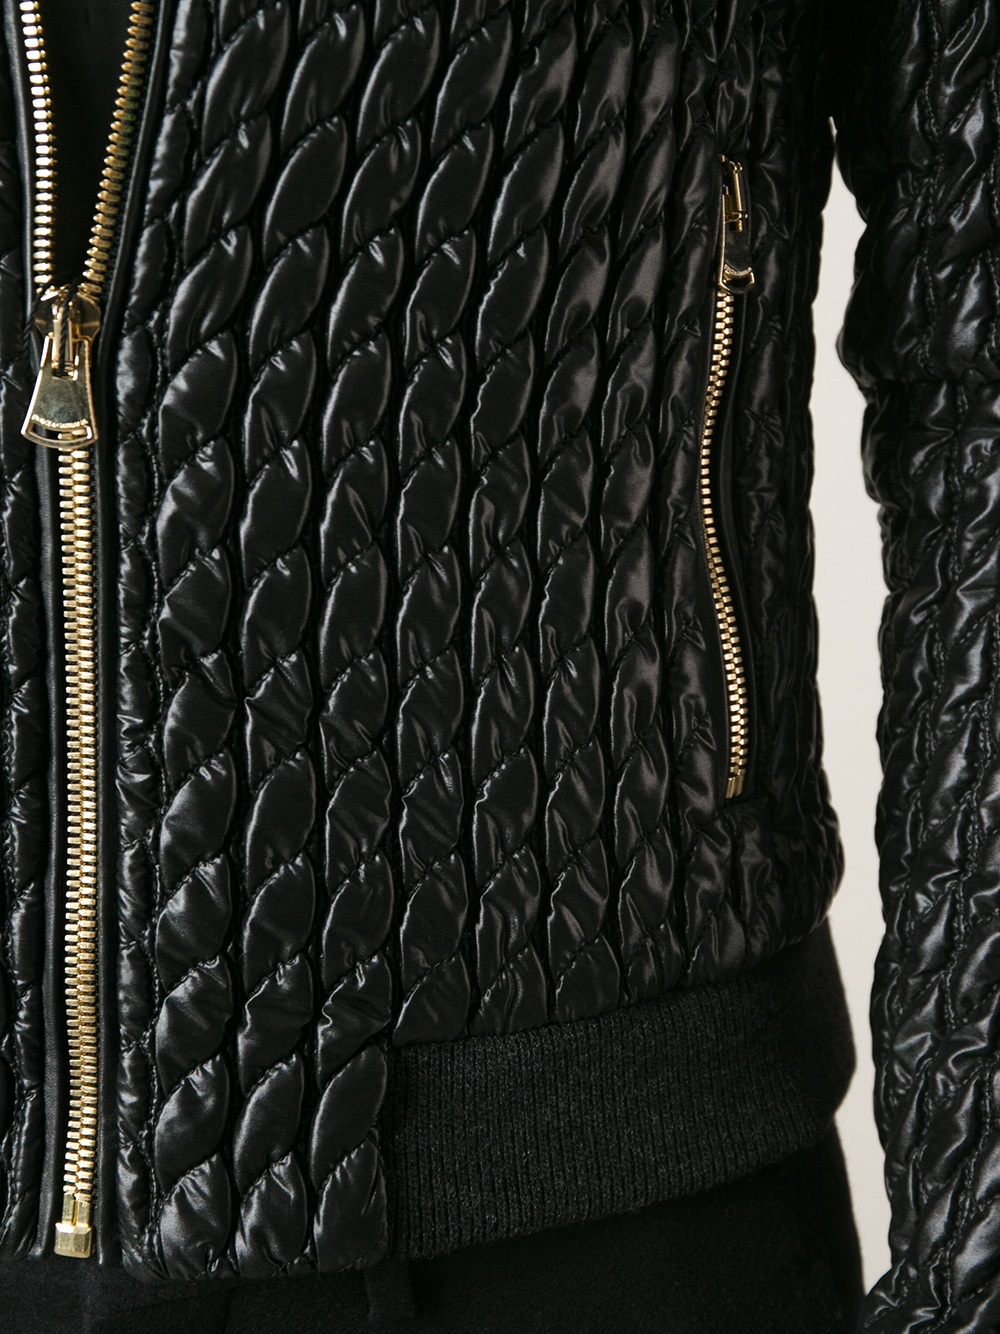 dolce gabbana quilted jacket